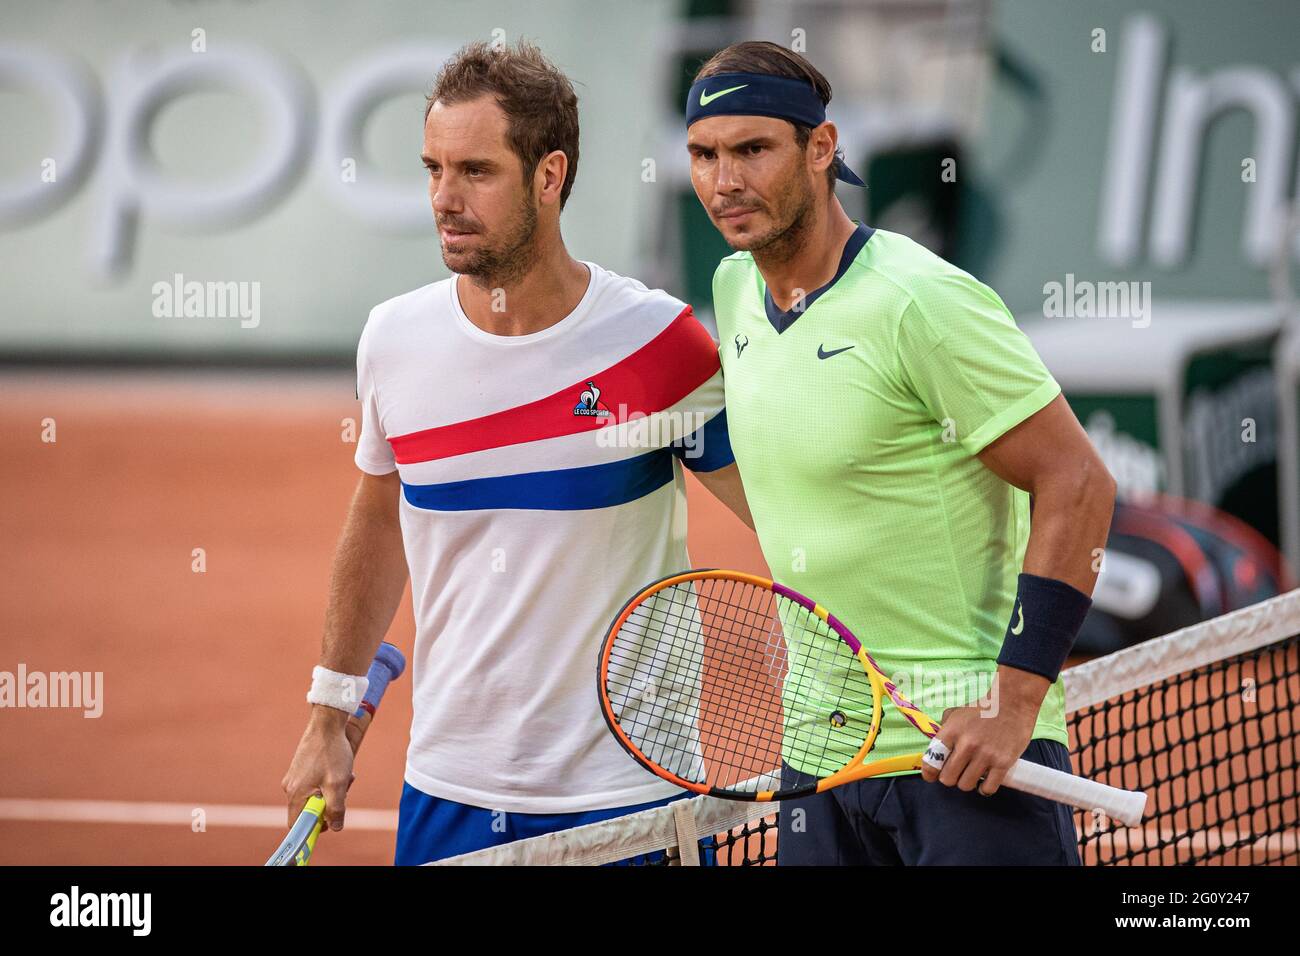 Paris, France. 3rd June, 2021. Rafael Nadal (R) of Spain and Richard Gasquet  of France pose for photos prior to the men's singles second round match at  the French Open tennis tournament